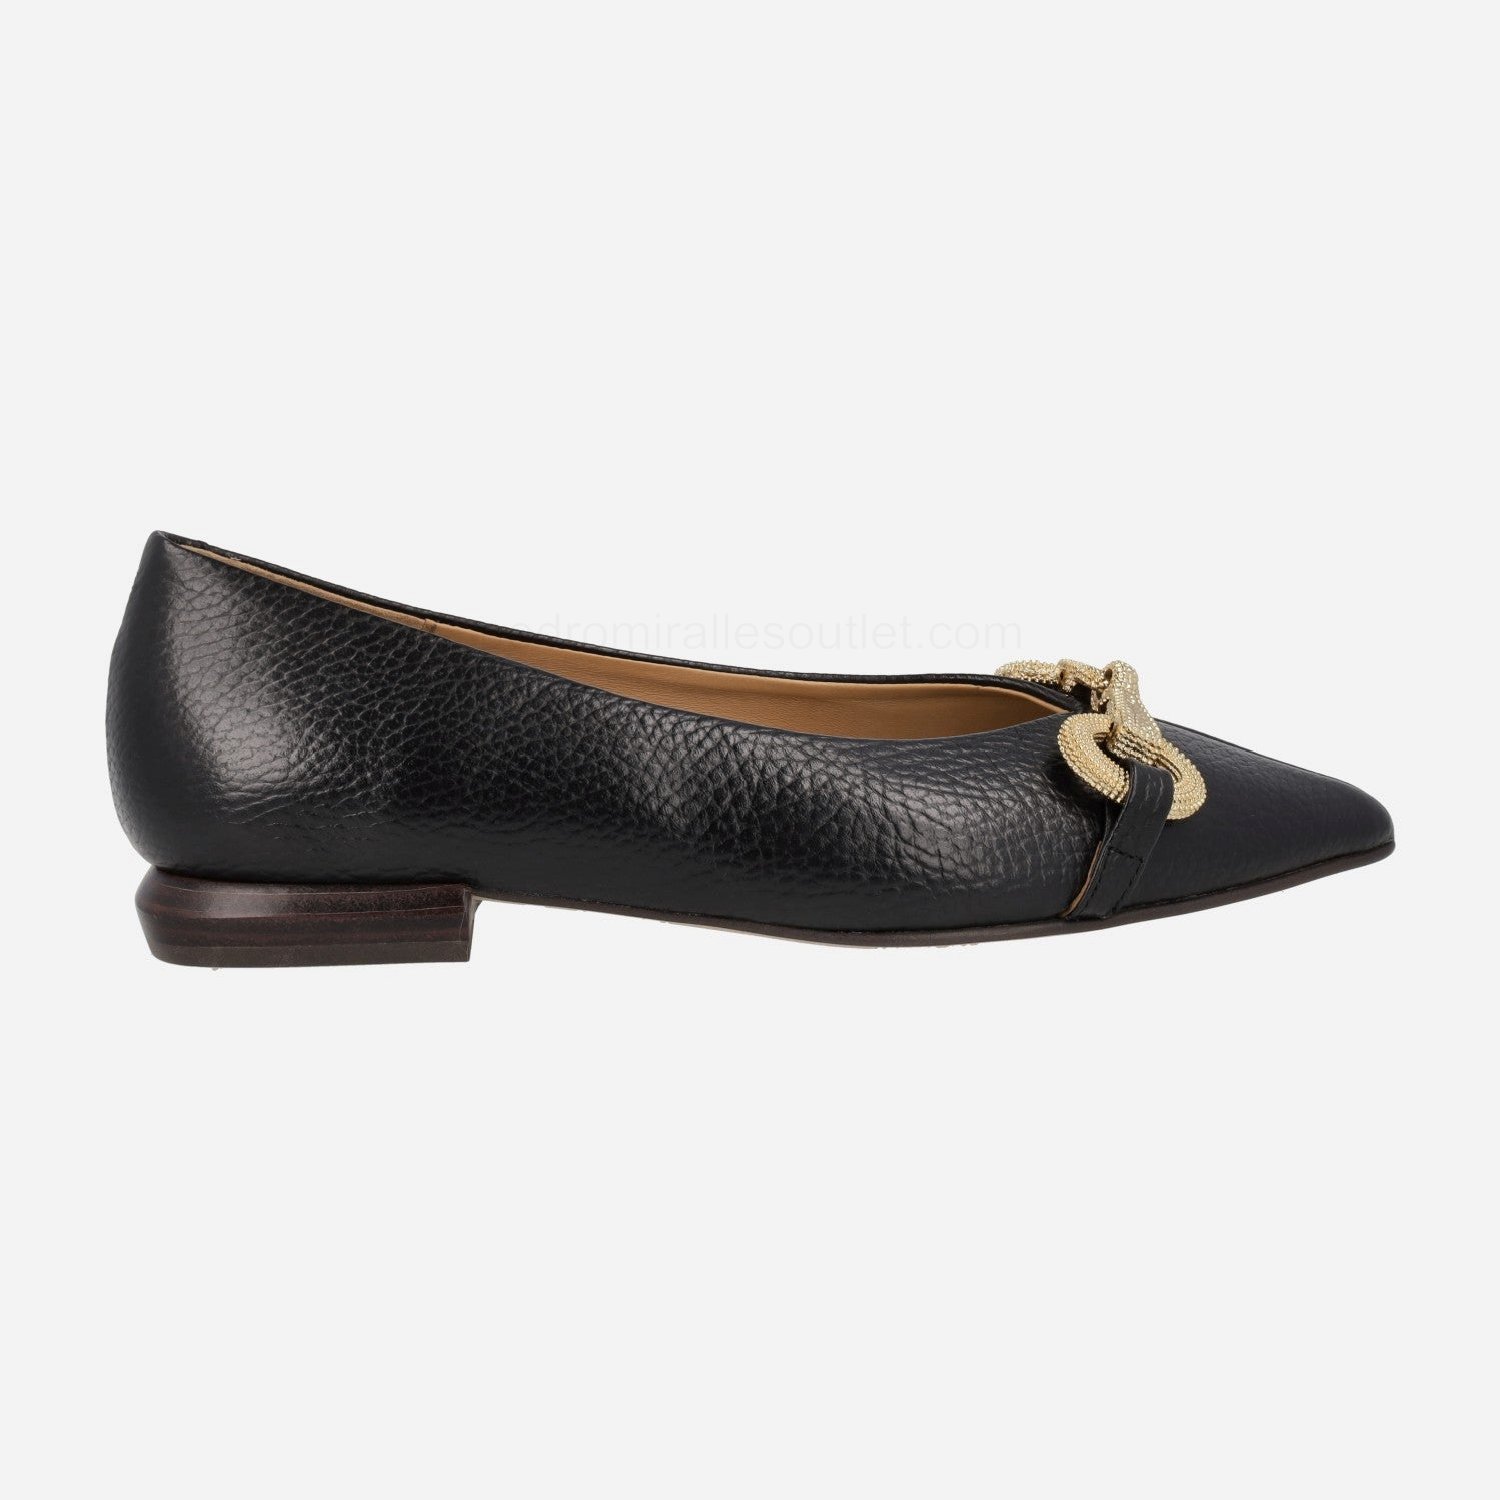 (image for) Meroua black leather ballerinas with gold detail | pedro miralles outlet-1803